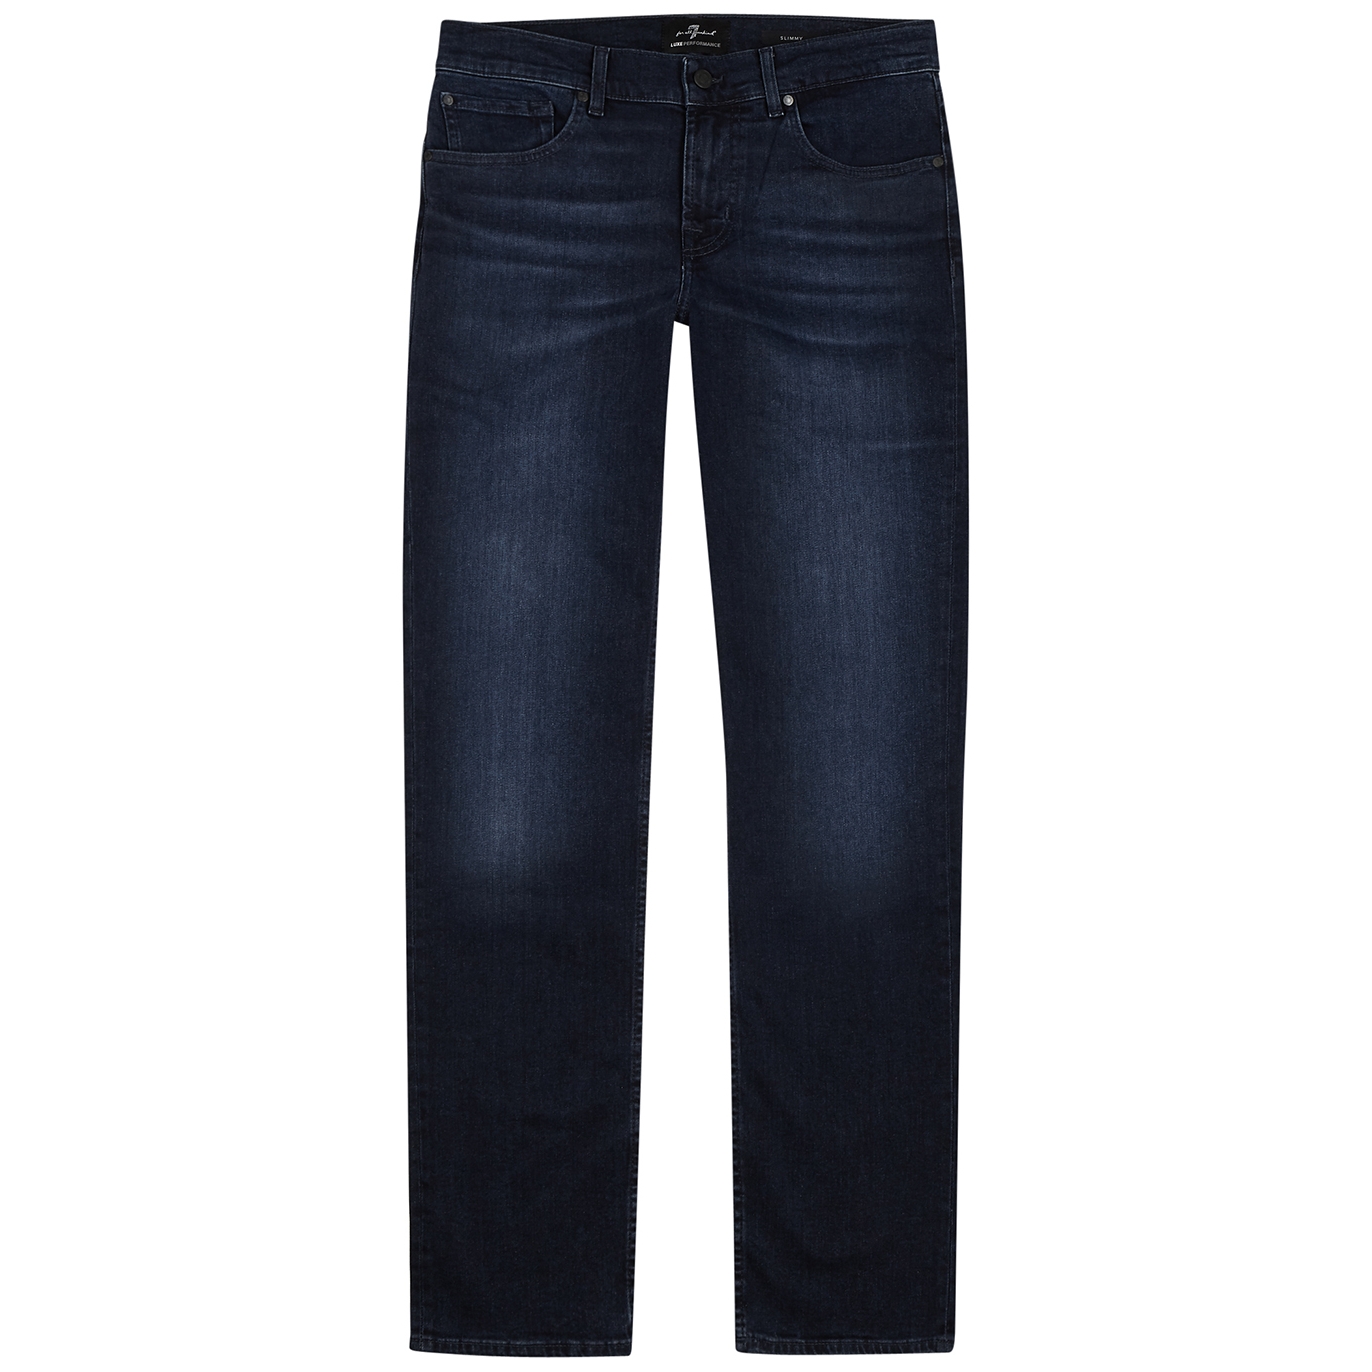 Seven 7 For All Mankind Slimmy Luxe Performance+ Dark Blue Jeans